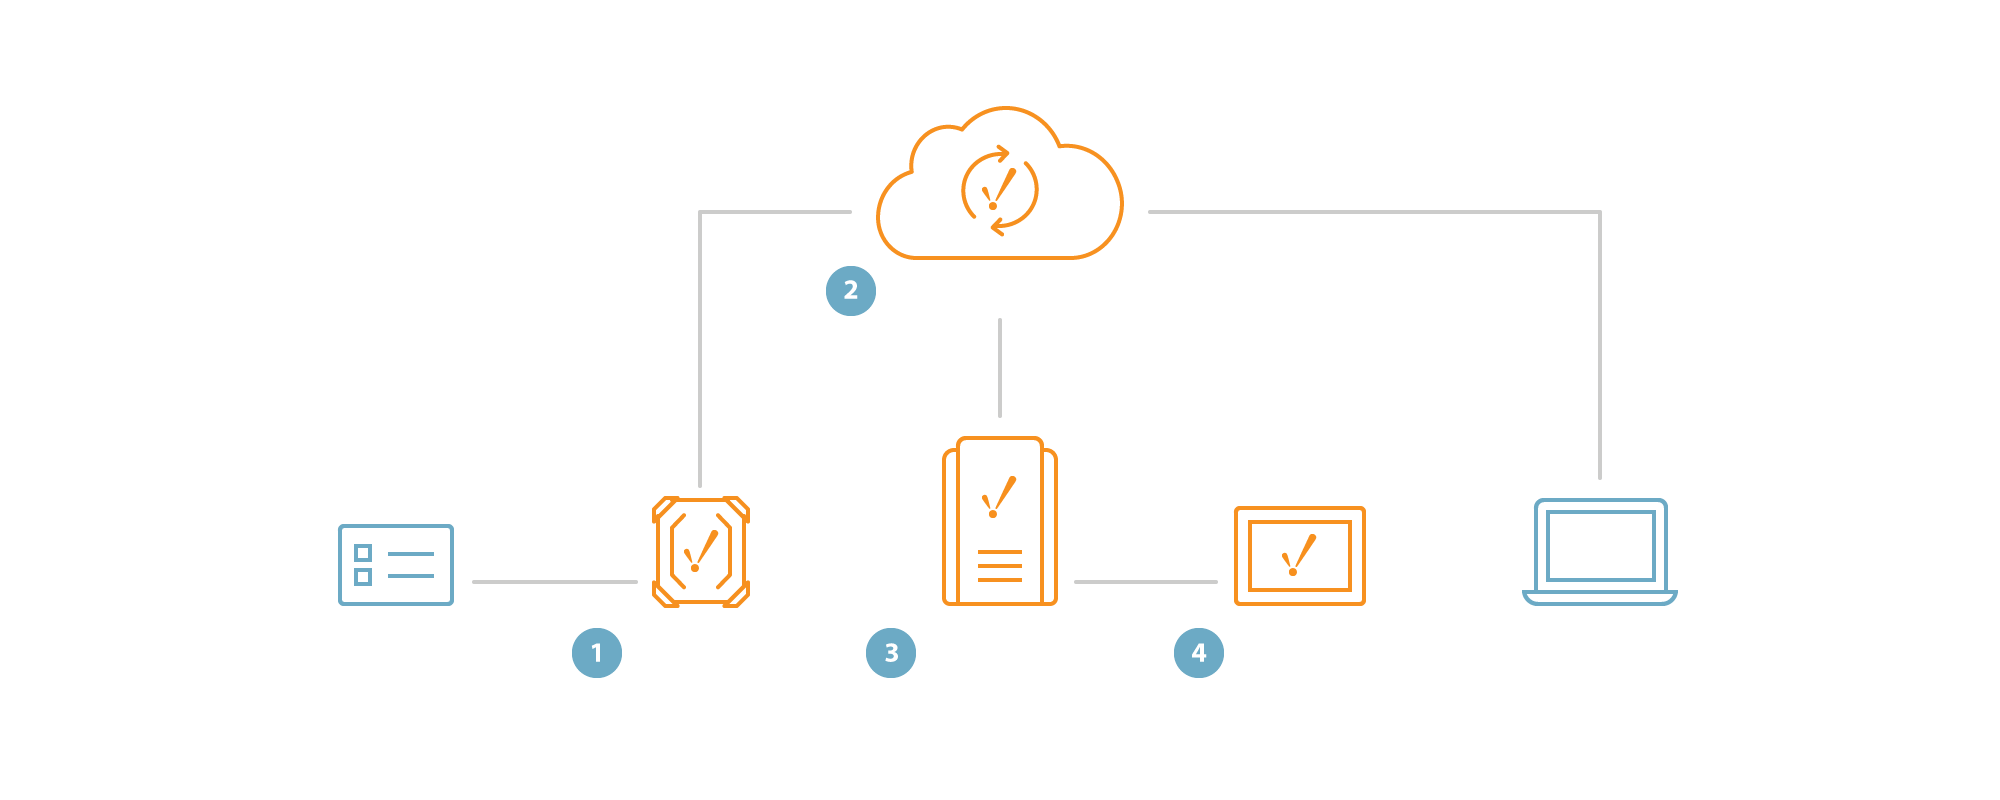 A simple architecture diagram showing an Ignition gateway and an edge device both connected to an MQTT server